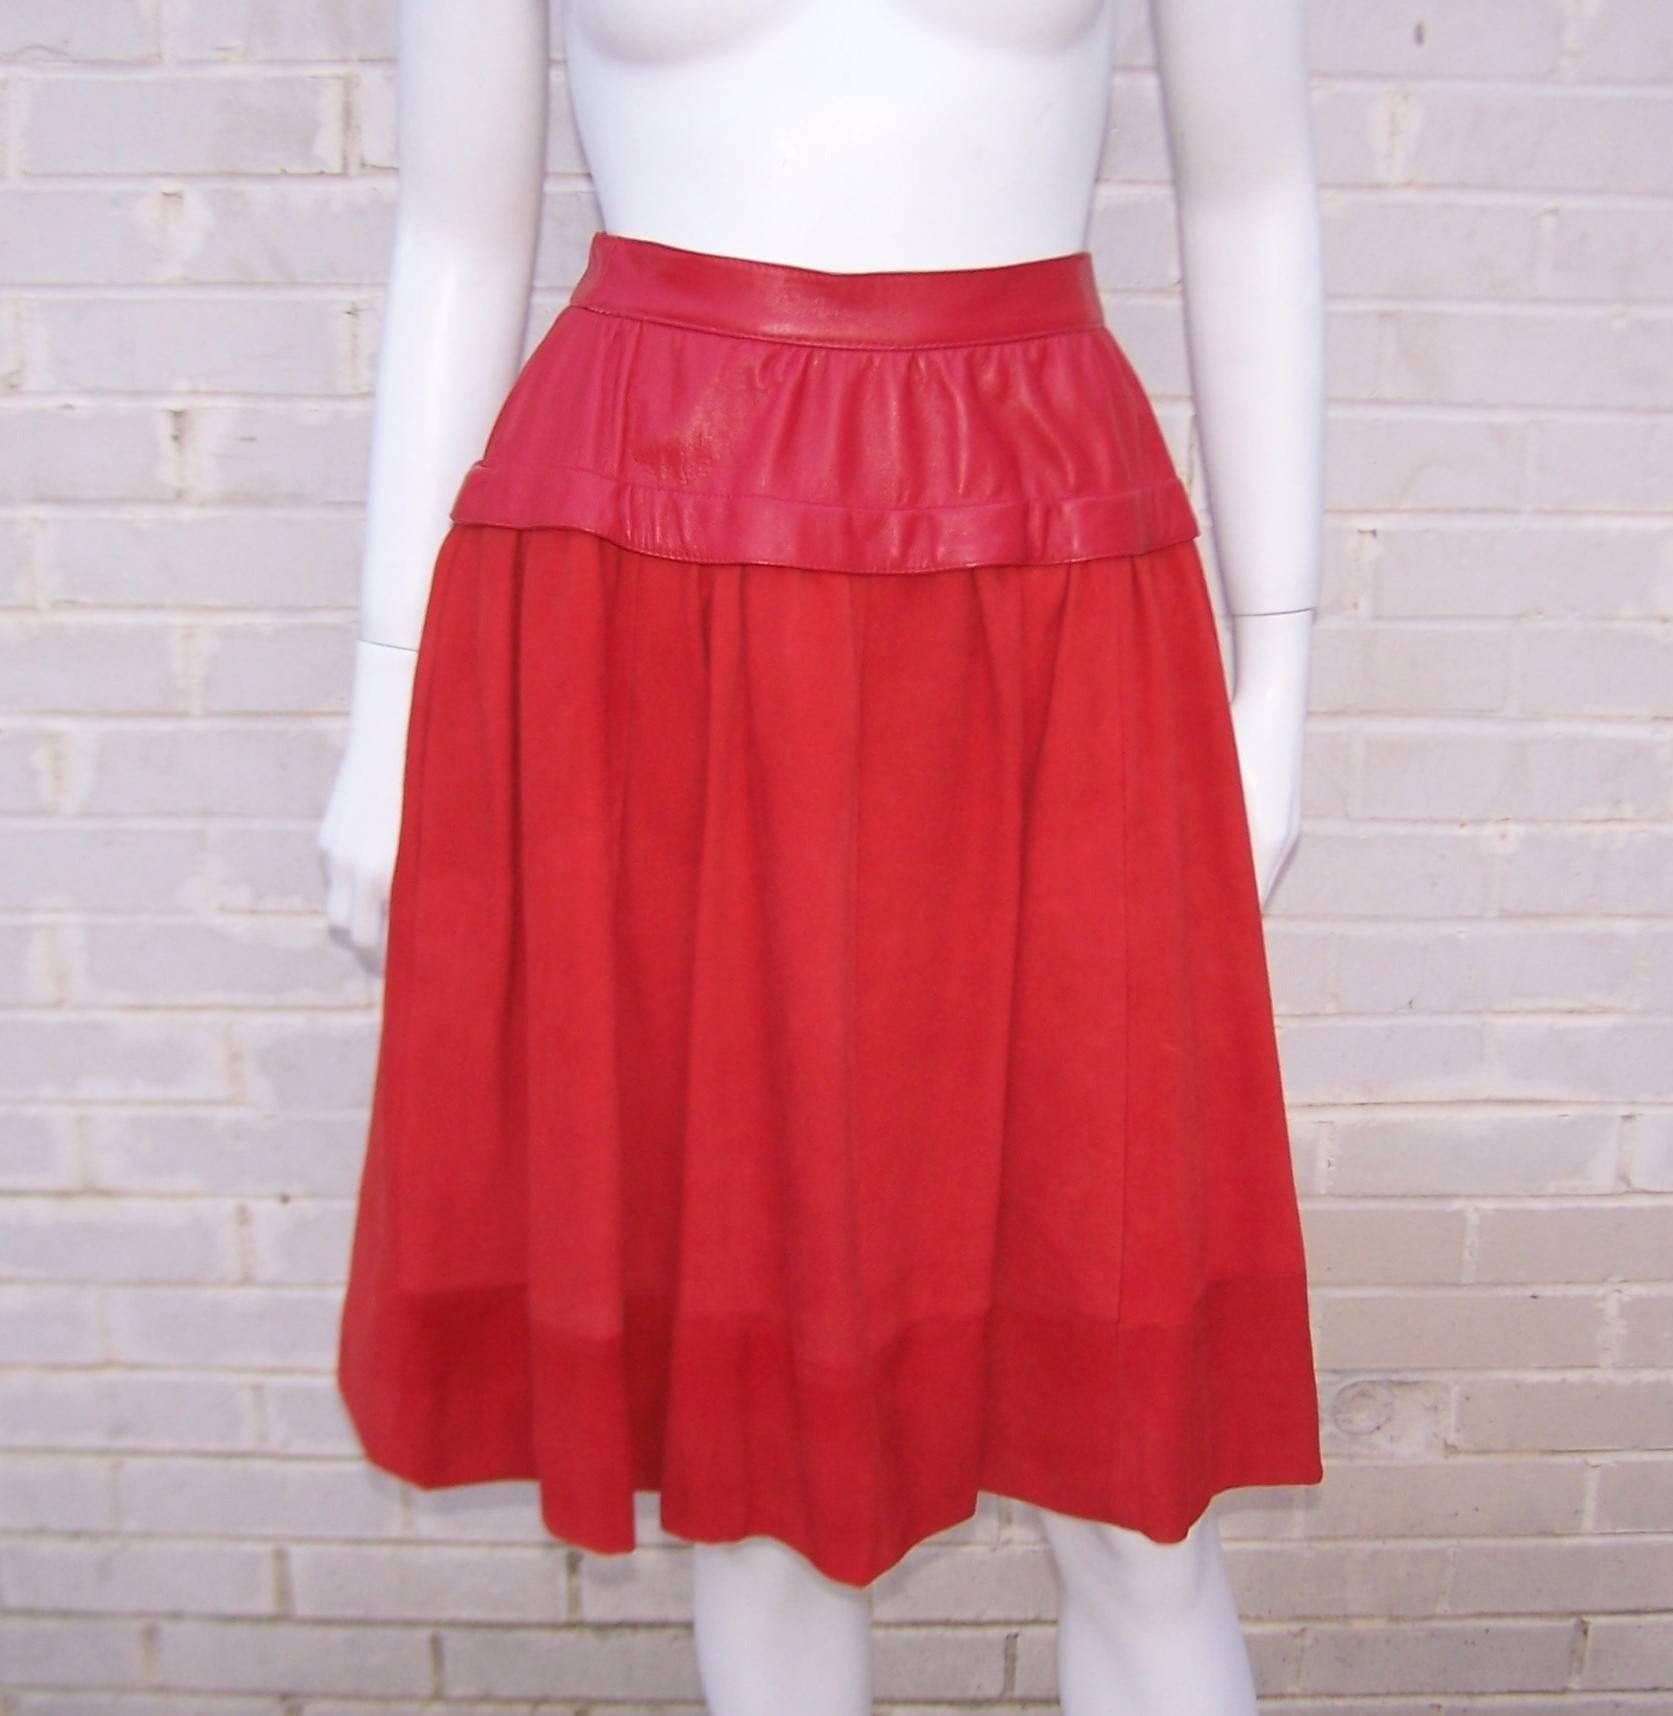 New Wave 1980's Lipstick Red Suede Leather Skirt Suit With Swing Jacket 3